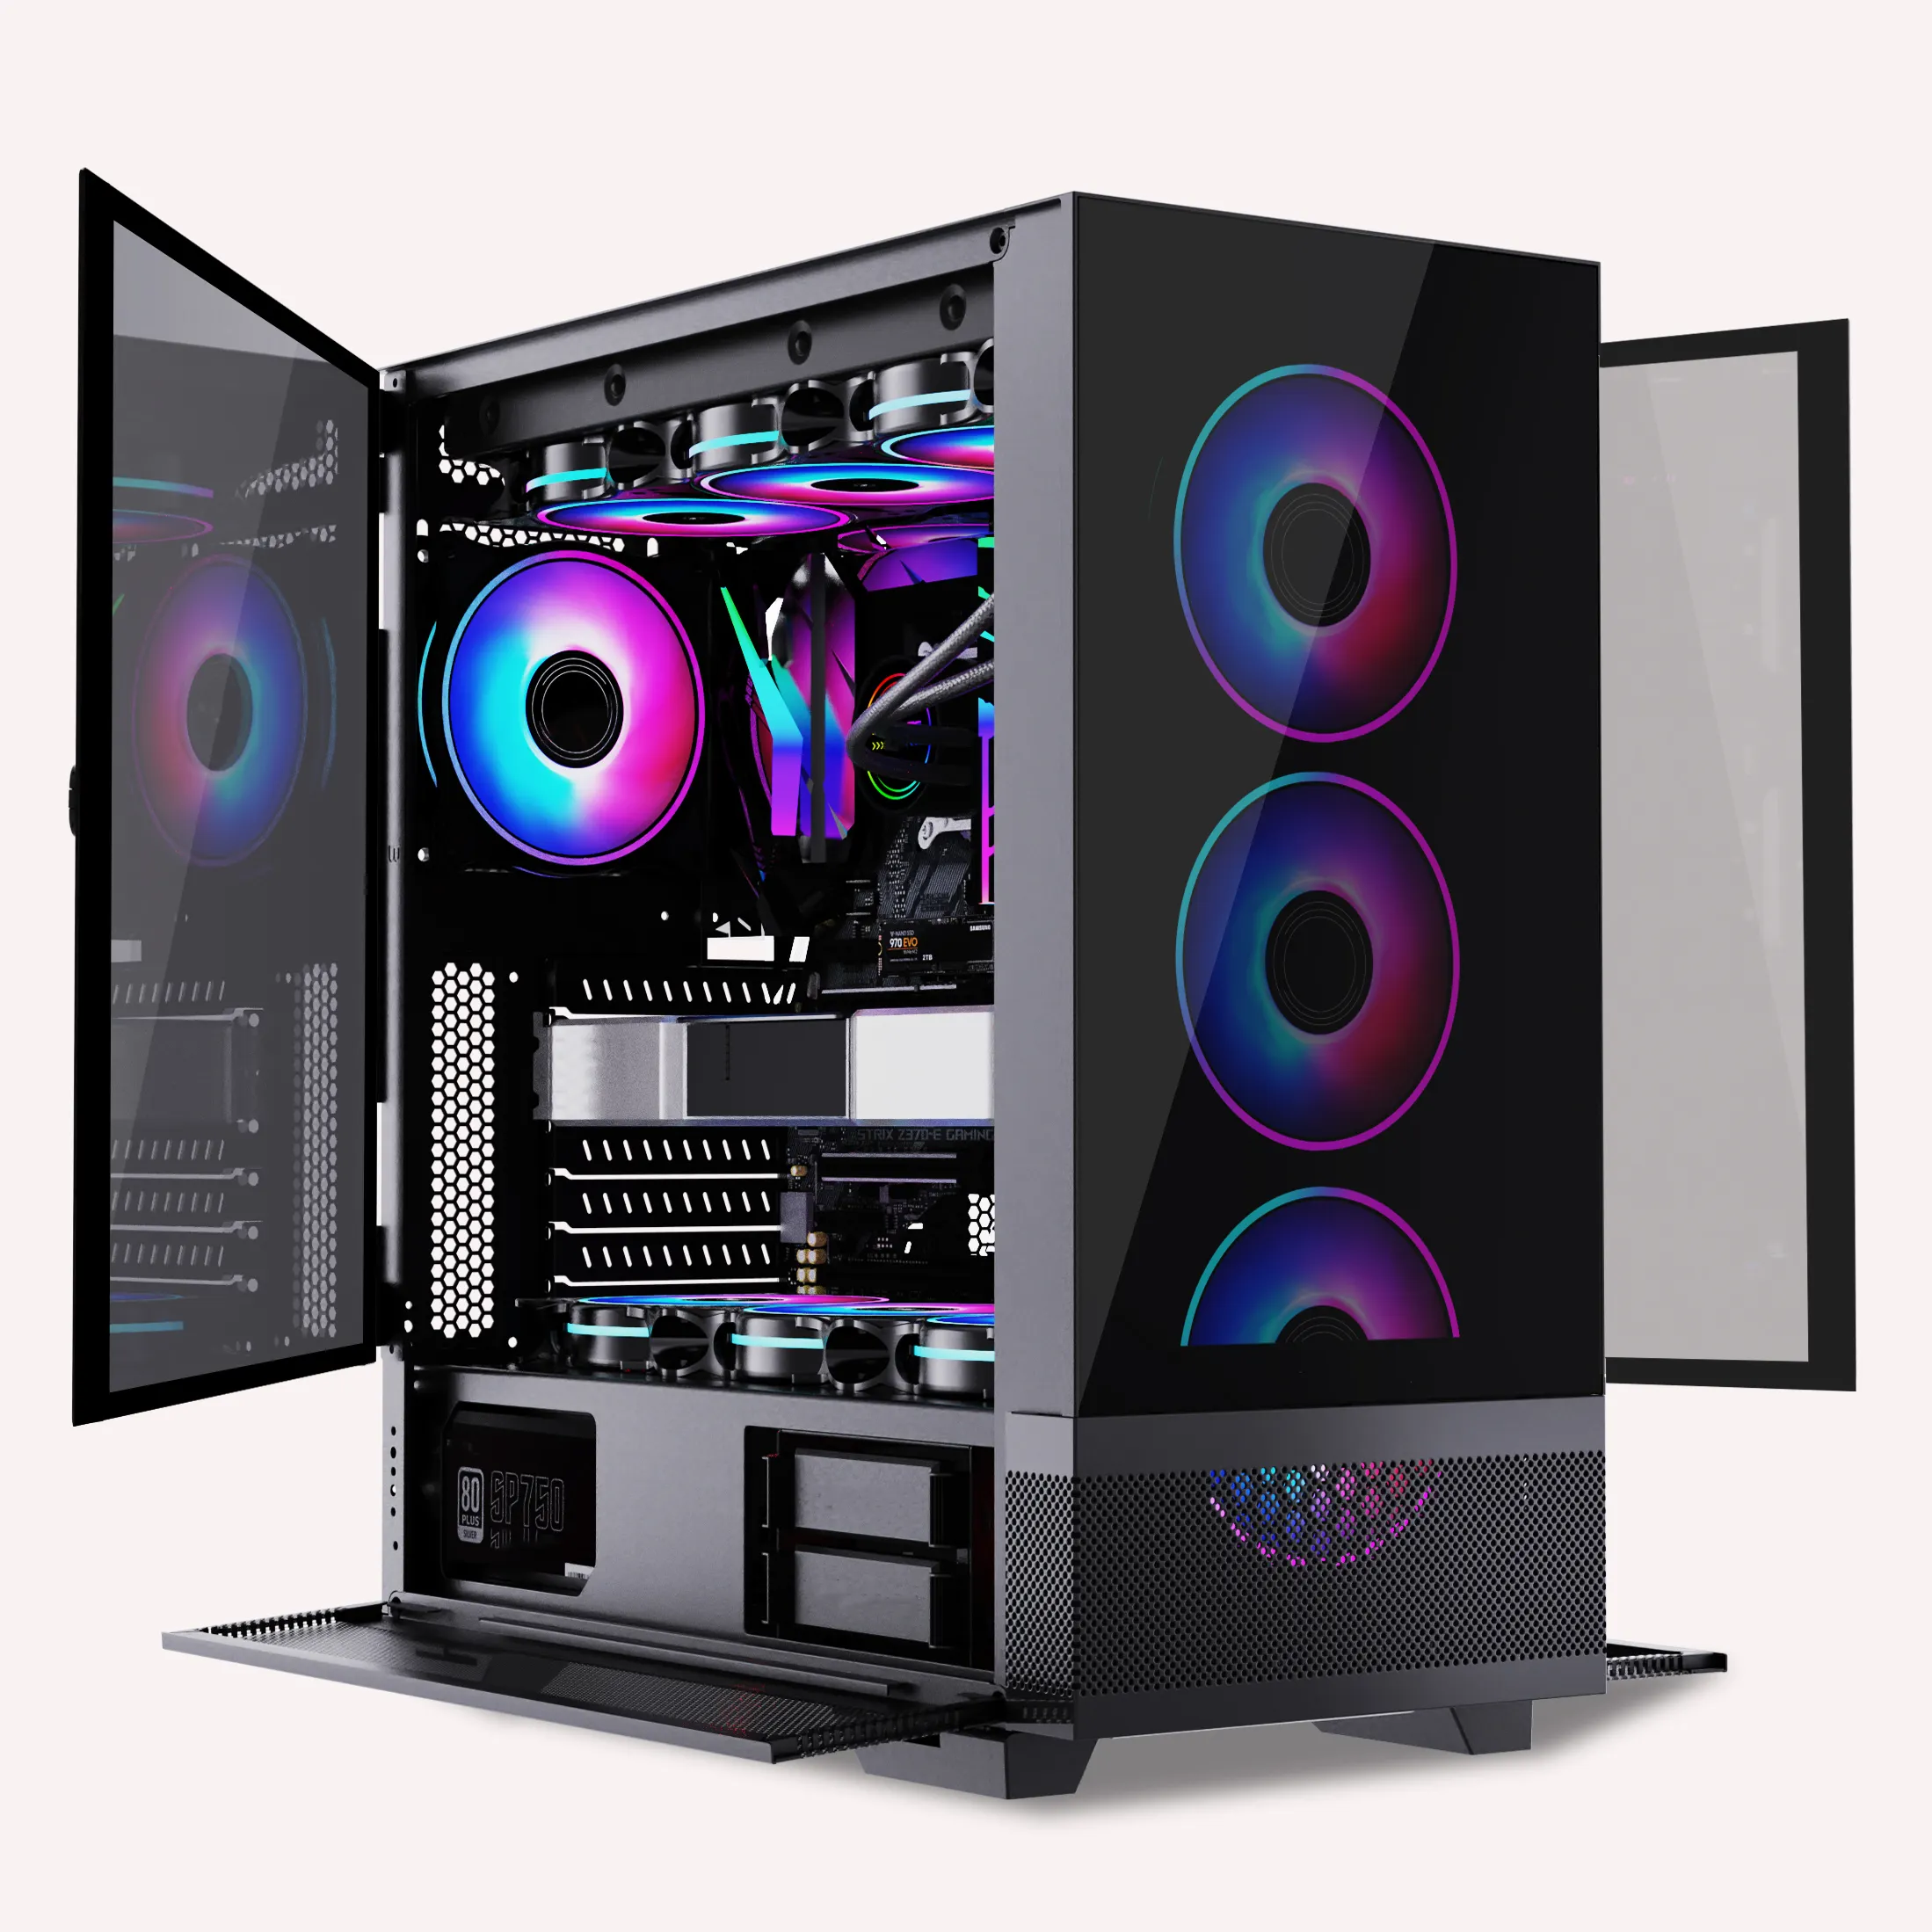 The Powercase Gaming Computer Cases PC Gaming E-ATX Computer